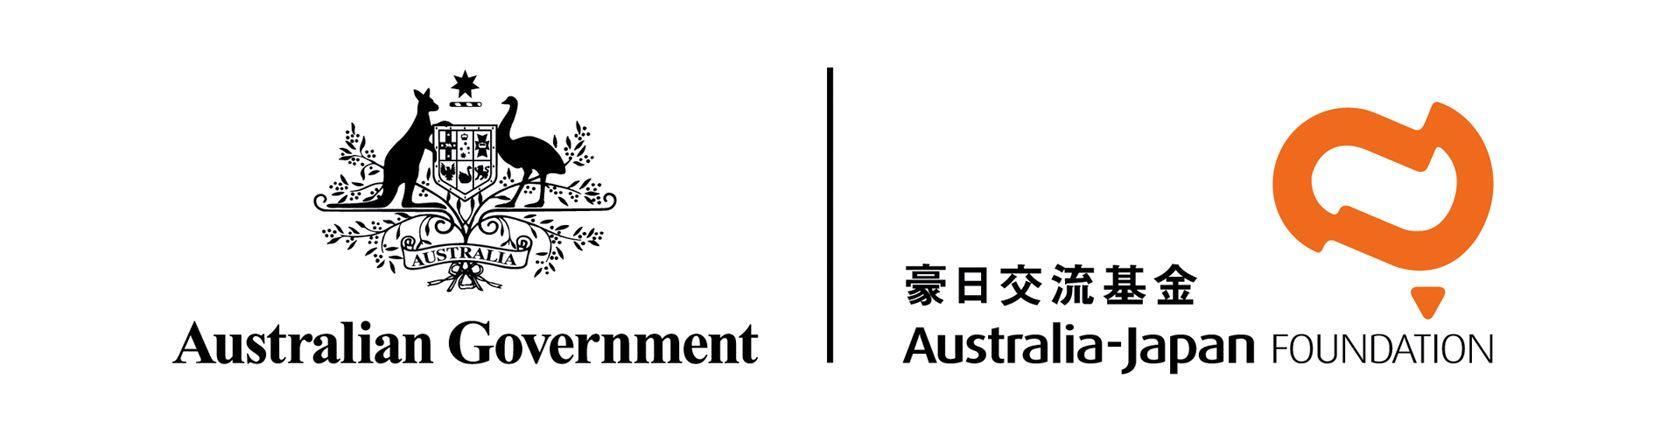 AusAID Logo - Style guide and logos of Foreign Affairs and Trade